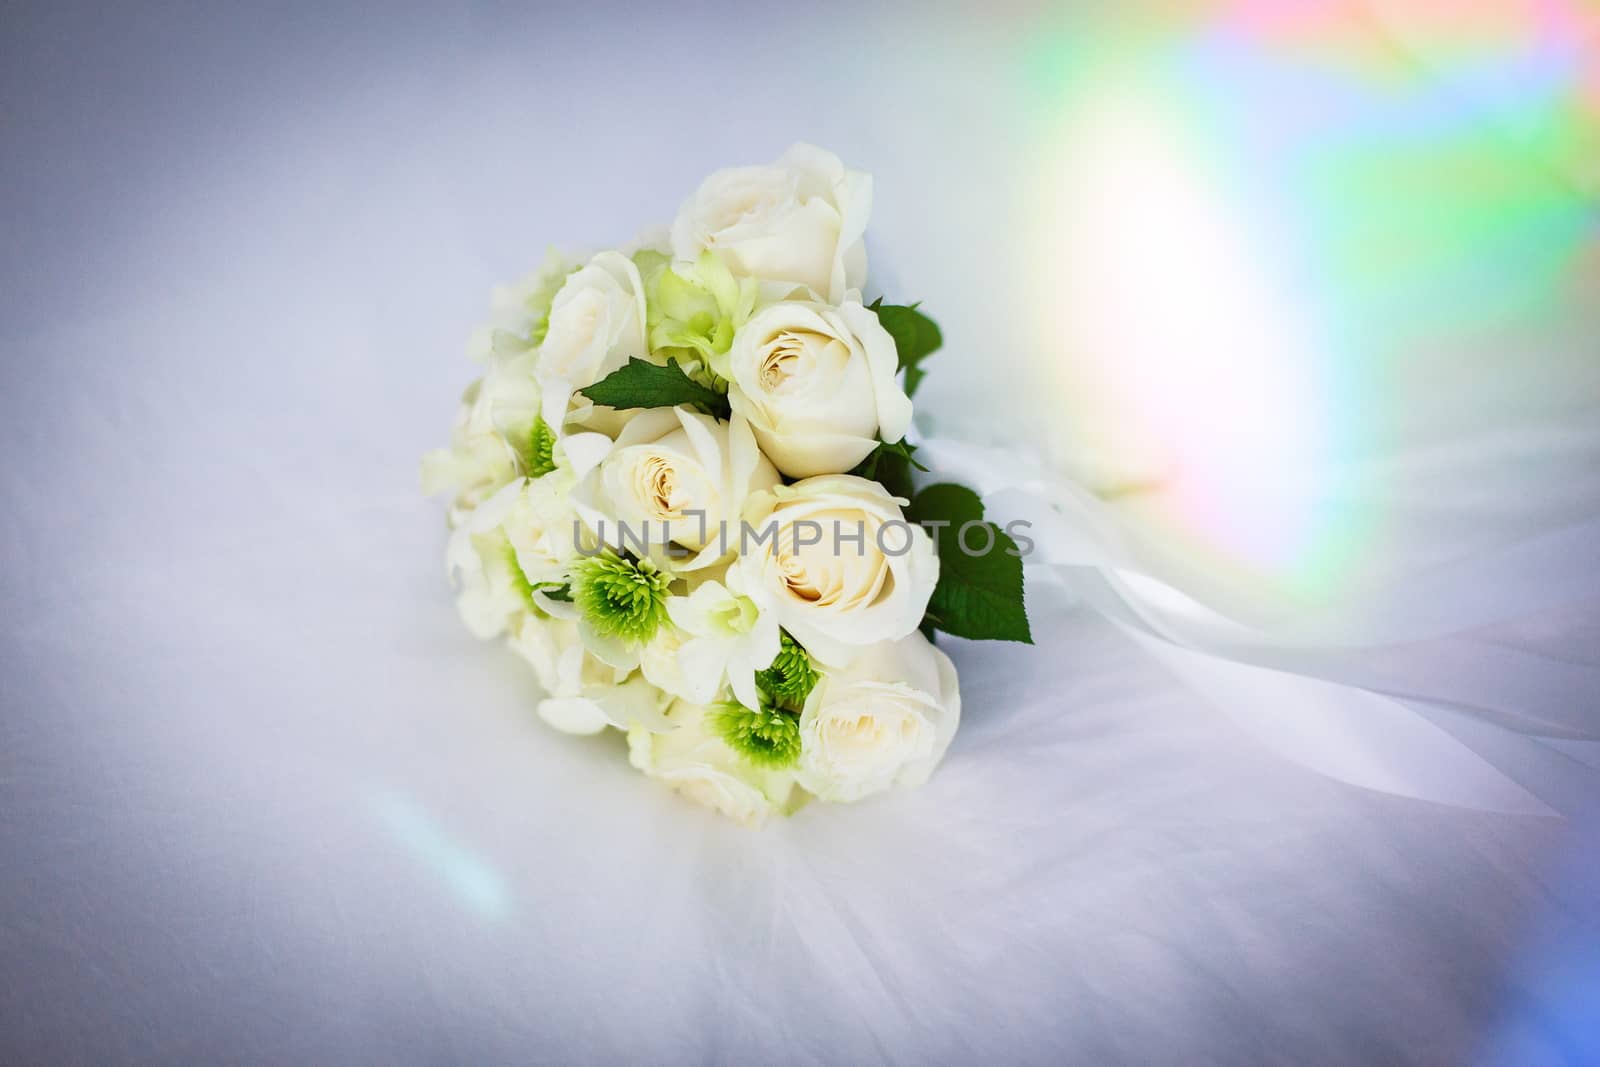 Wedding bouquet of white roses on a white veil